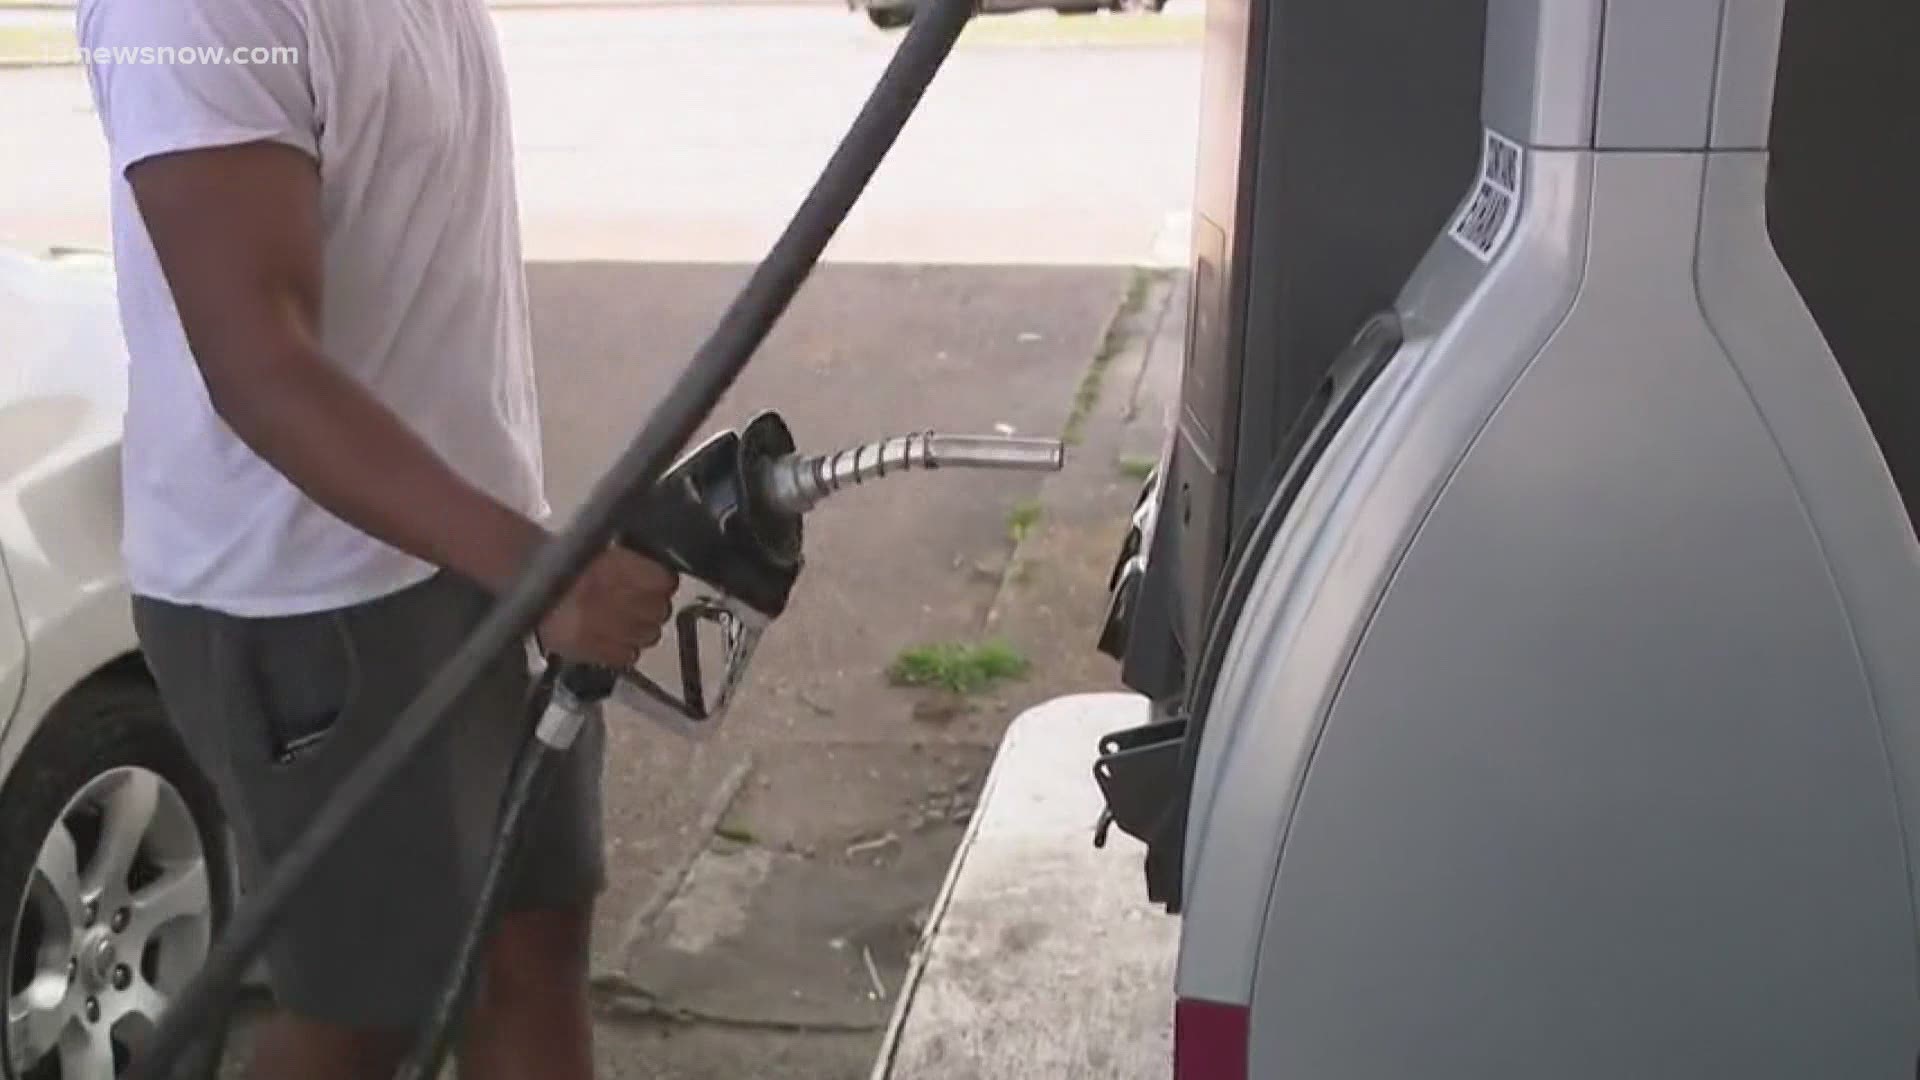 AAA Tidewater spokeswoman Holly Dalby said many gas stations have fuel again, but the price you'll pay per gallon may stress you out.